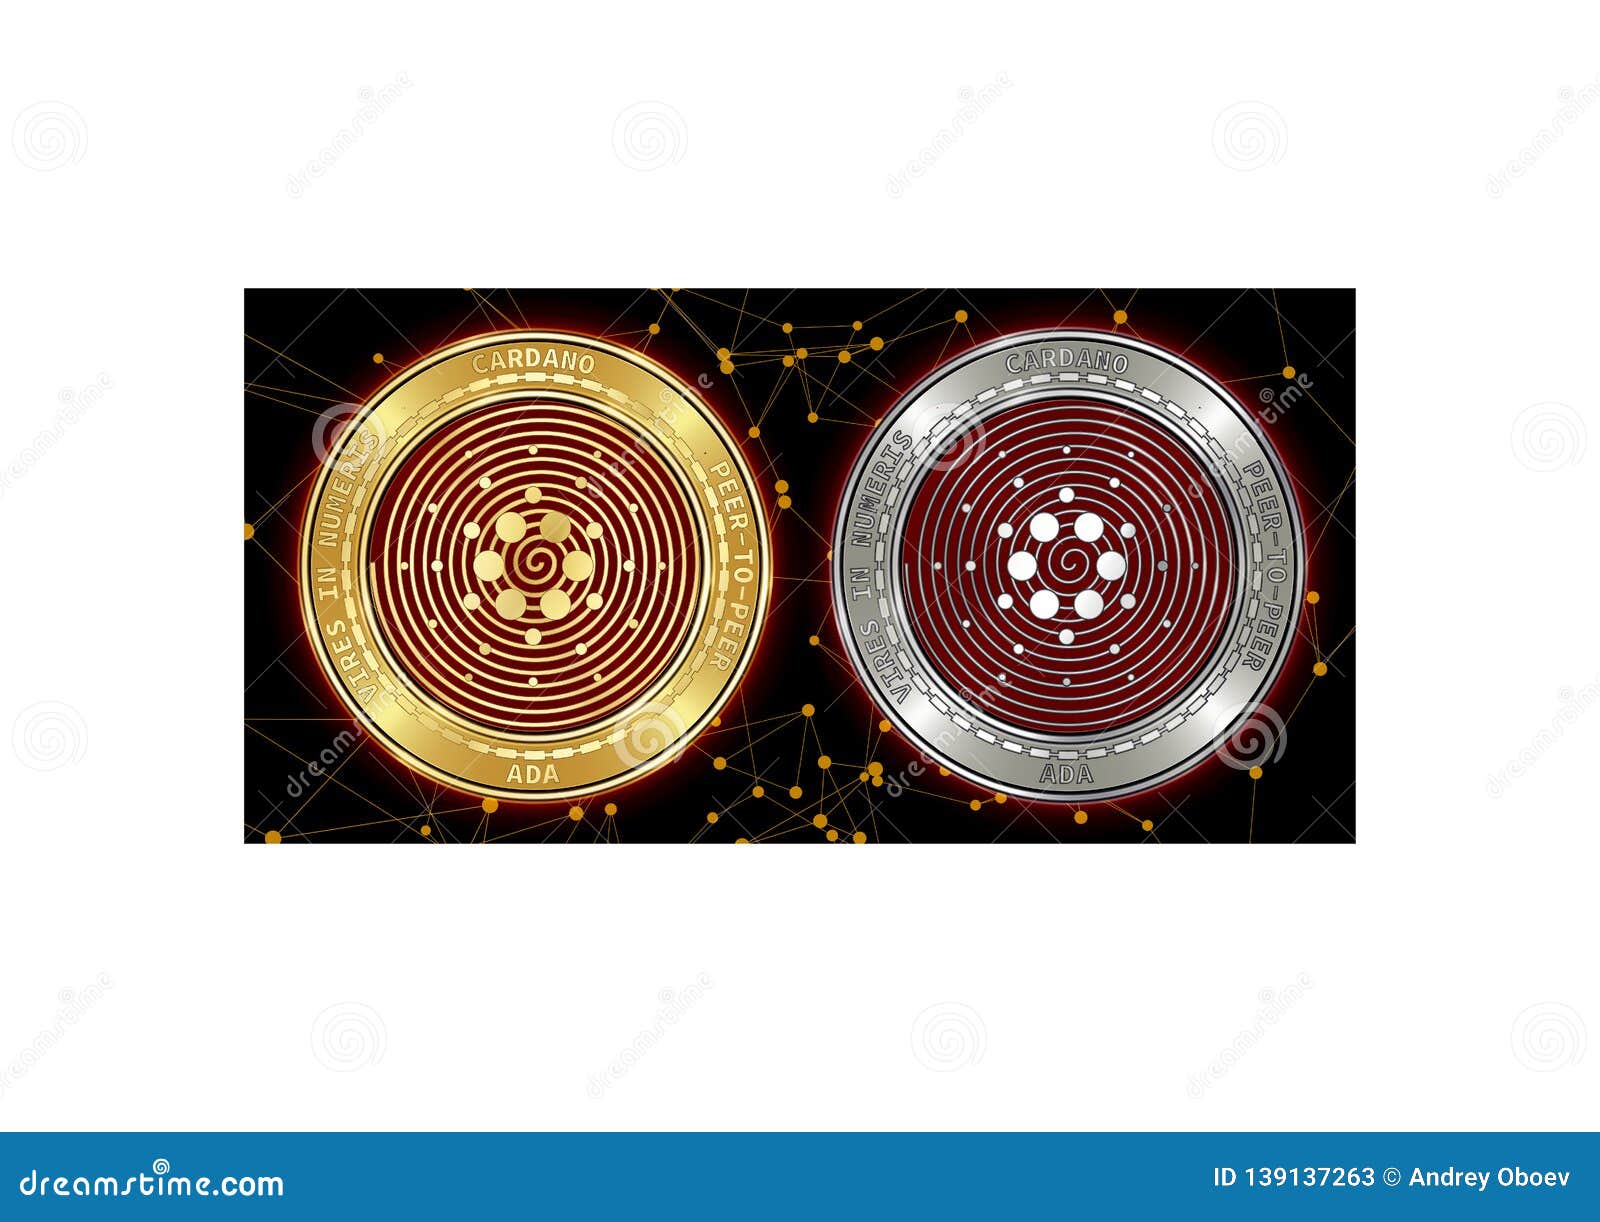 Golden and Silver Cardano ADA Cryptocurrency Coins on Background of